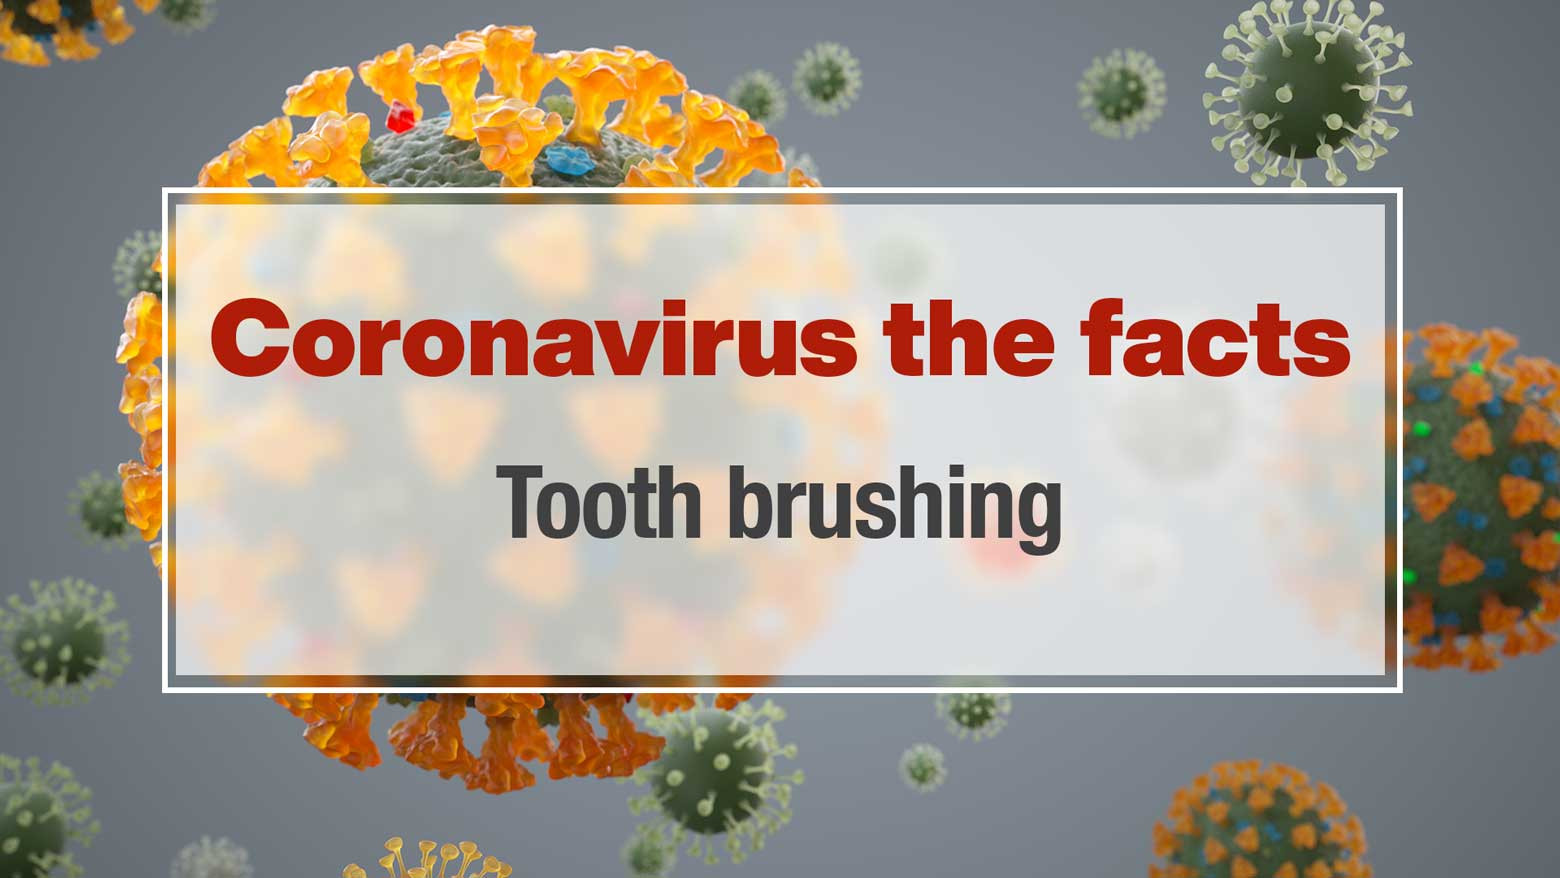 Does brushing teeth help to prevent coronavirus infection?